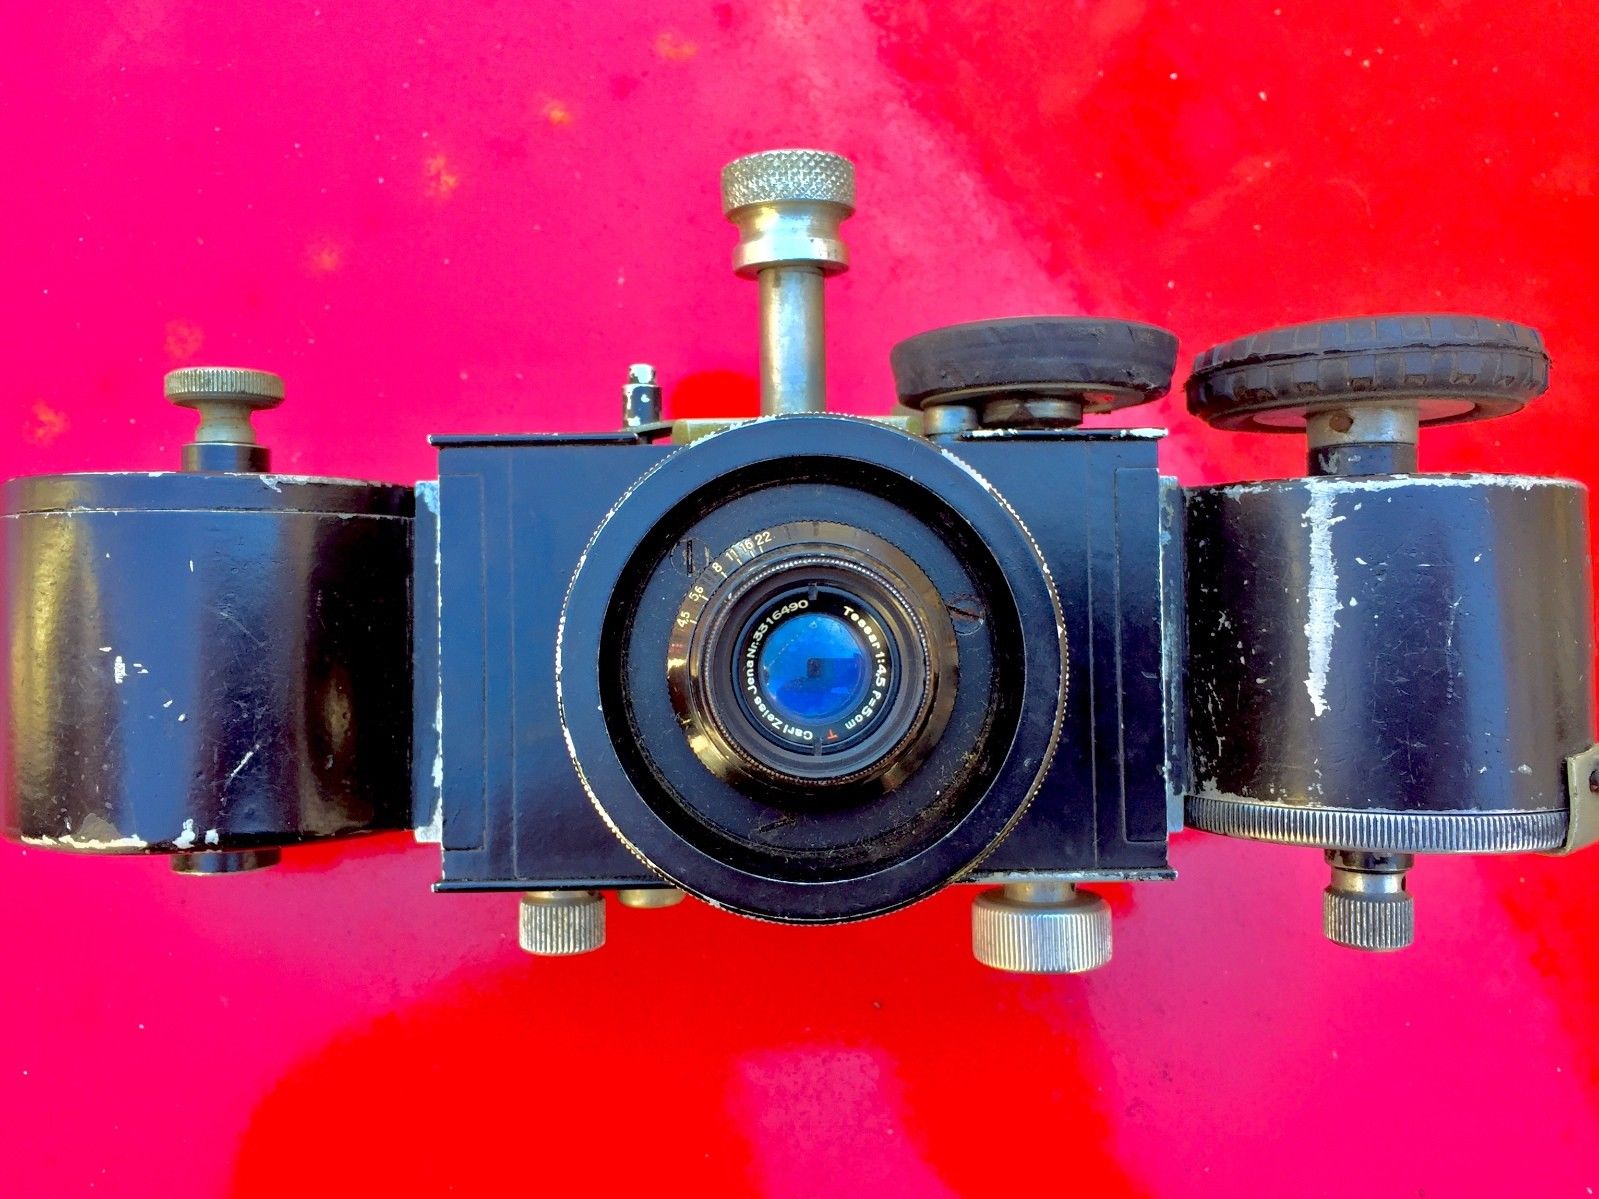 This Rare German Police Camera Will Set You Back $3,500. But Why?